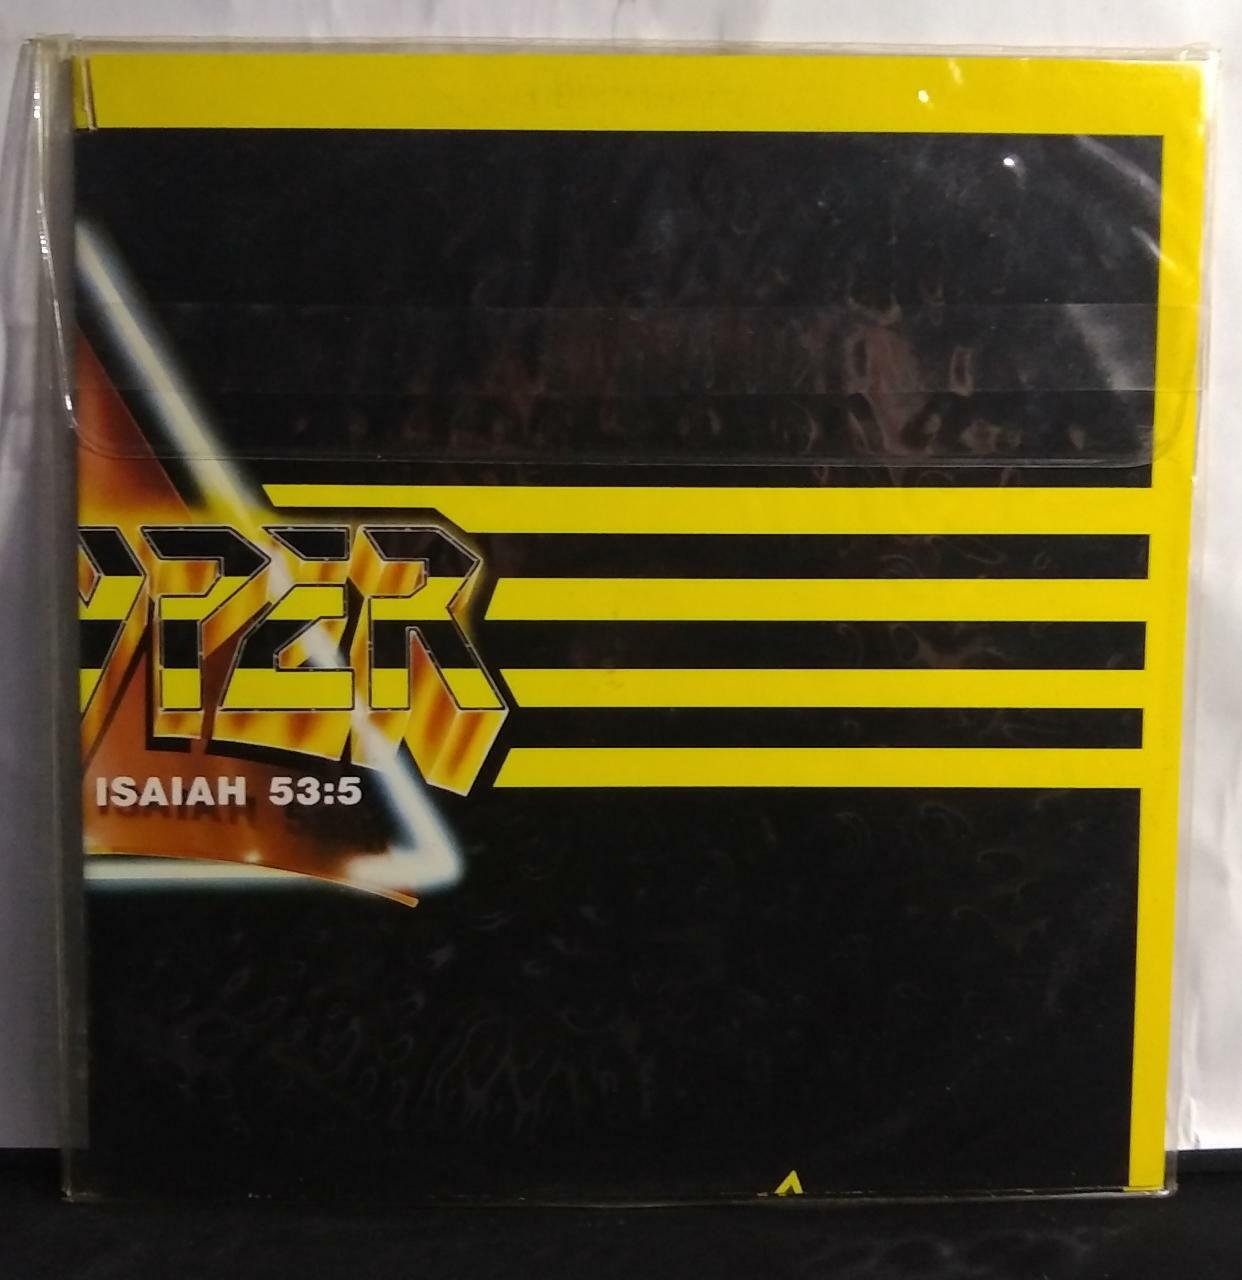 Vinil - Stryper - to Hell With the Devil (USA/Picture)